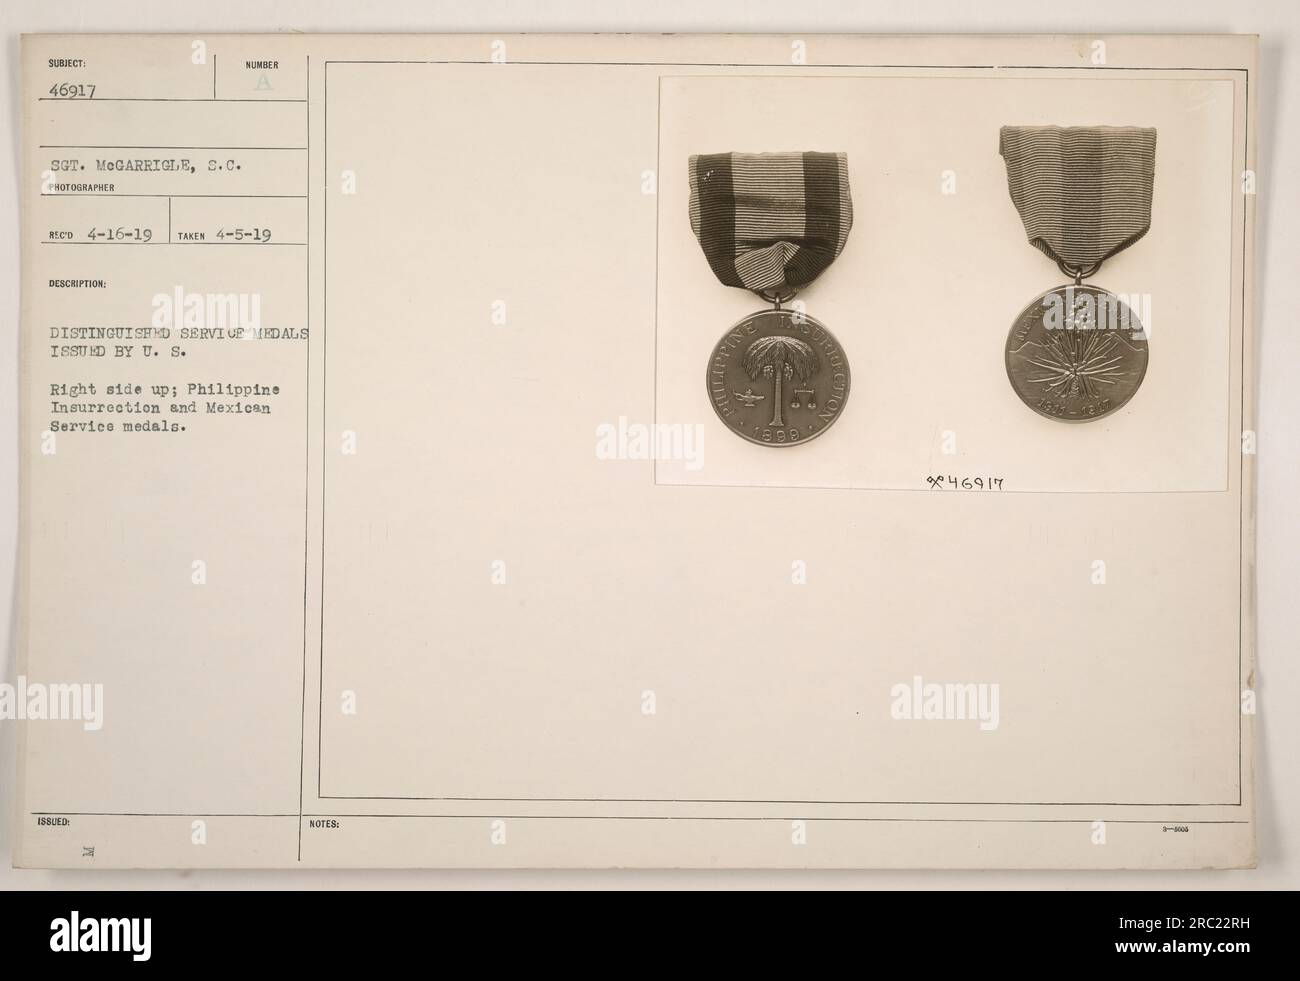 This photograph shows the Distinguished Service Medals issued by the U.S. military, specifically the Philippine Insurrection and Mexican Service medals. The medals are displayed in the image, with the Philippine Insurrection medal seen on the right side and the Mexican Service medal on the left side, as displayed right side up according to military protocol. The photograph was taken on April 5, 1919 and received by the photographer on April 16, 1919. The photographed individual is identified as Sergeant McGarrigle with the serial number 46917. Stock Photo